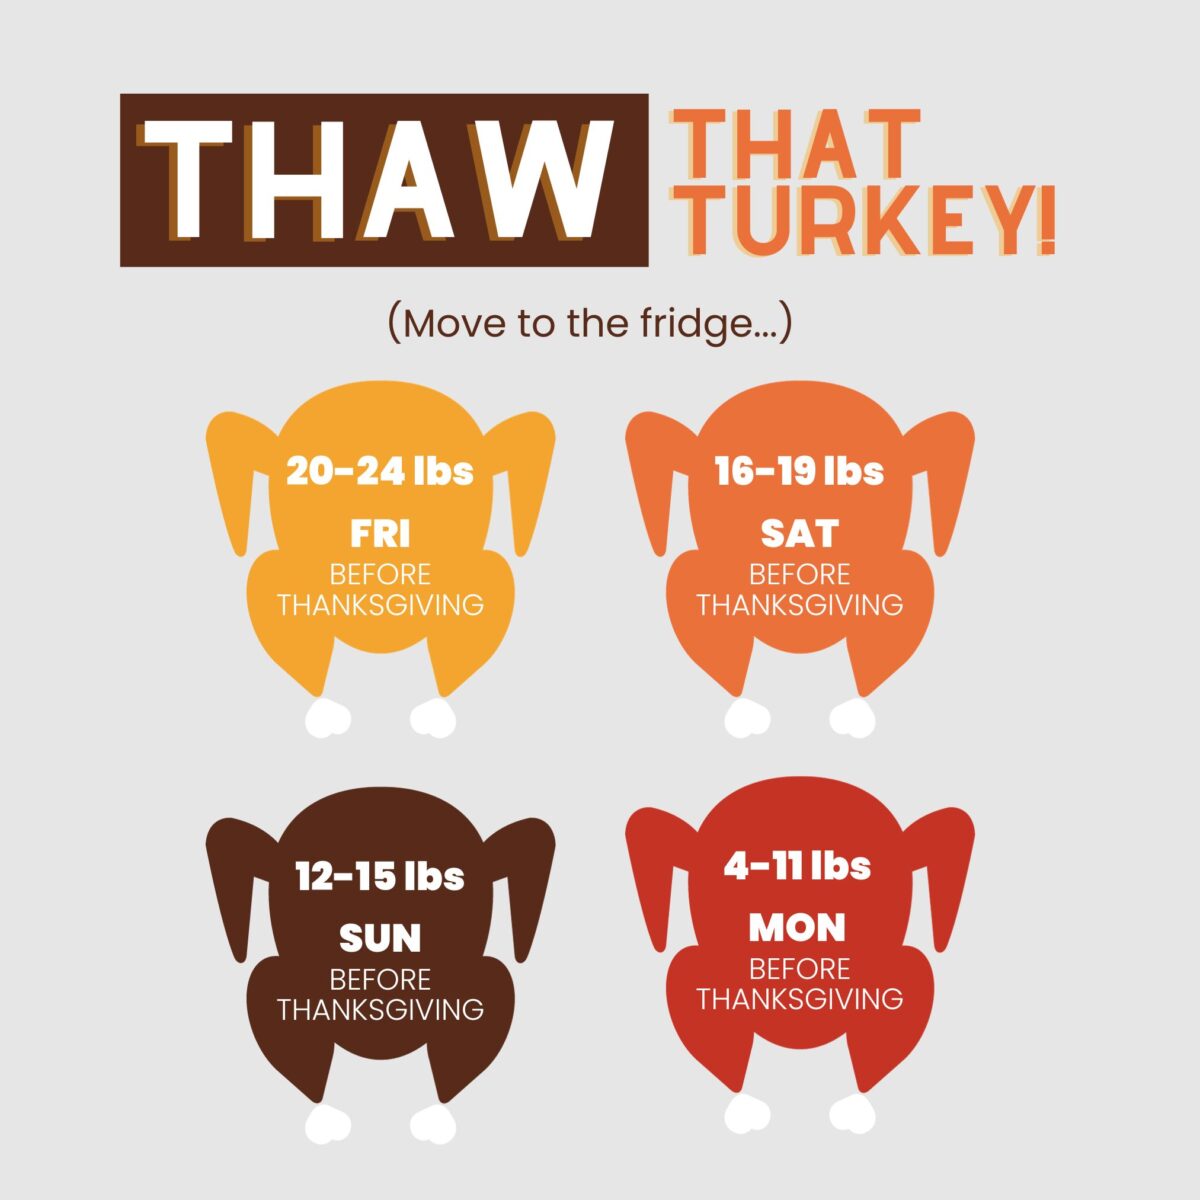 Graphic of when to that that turkey for cooking on Thanksgiving.